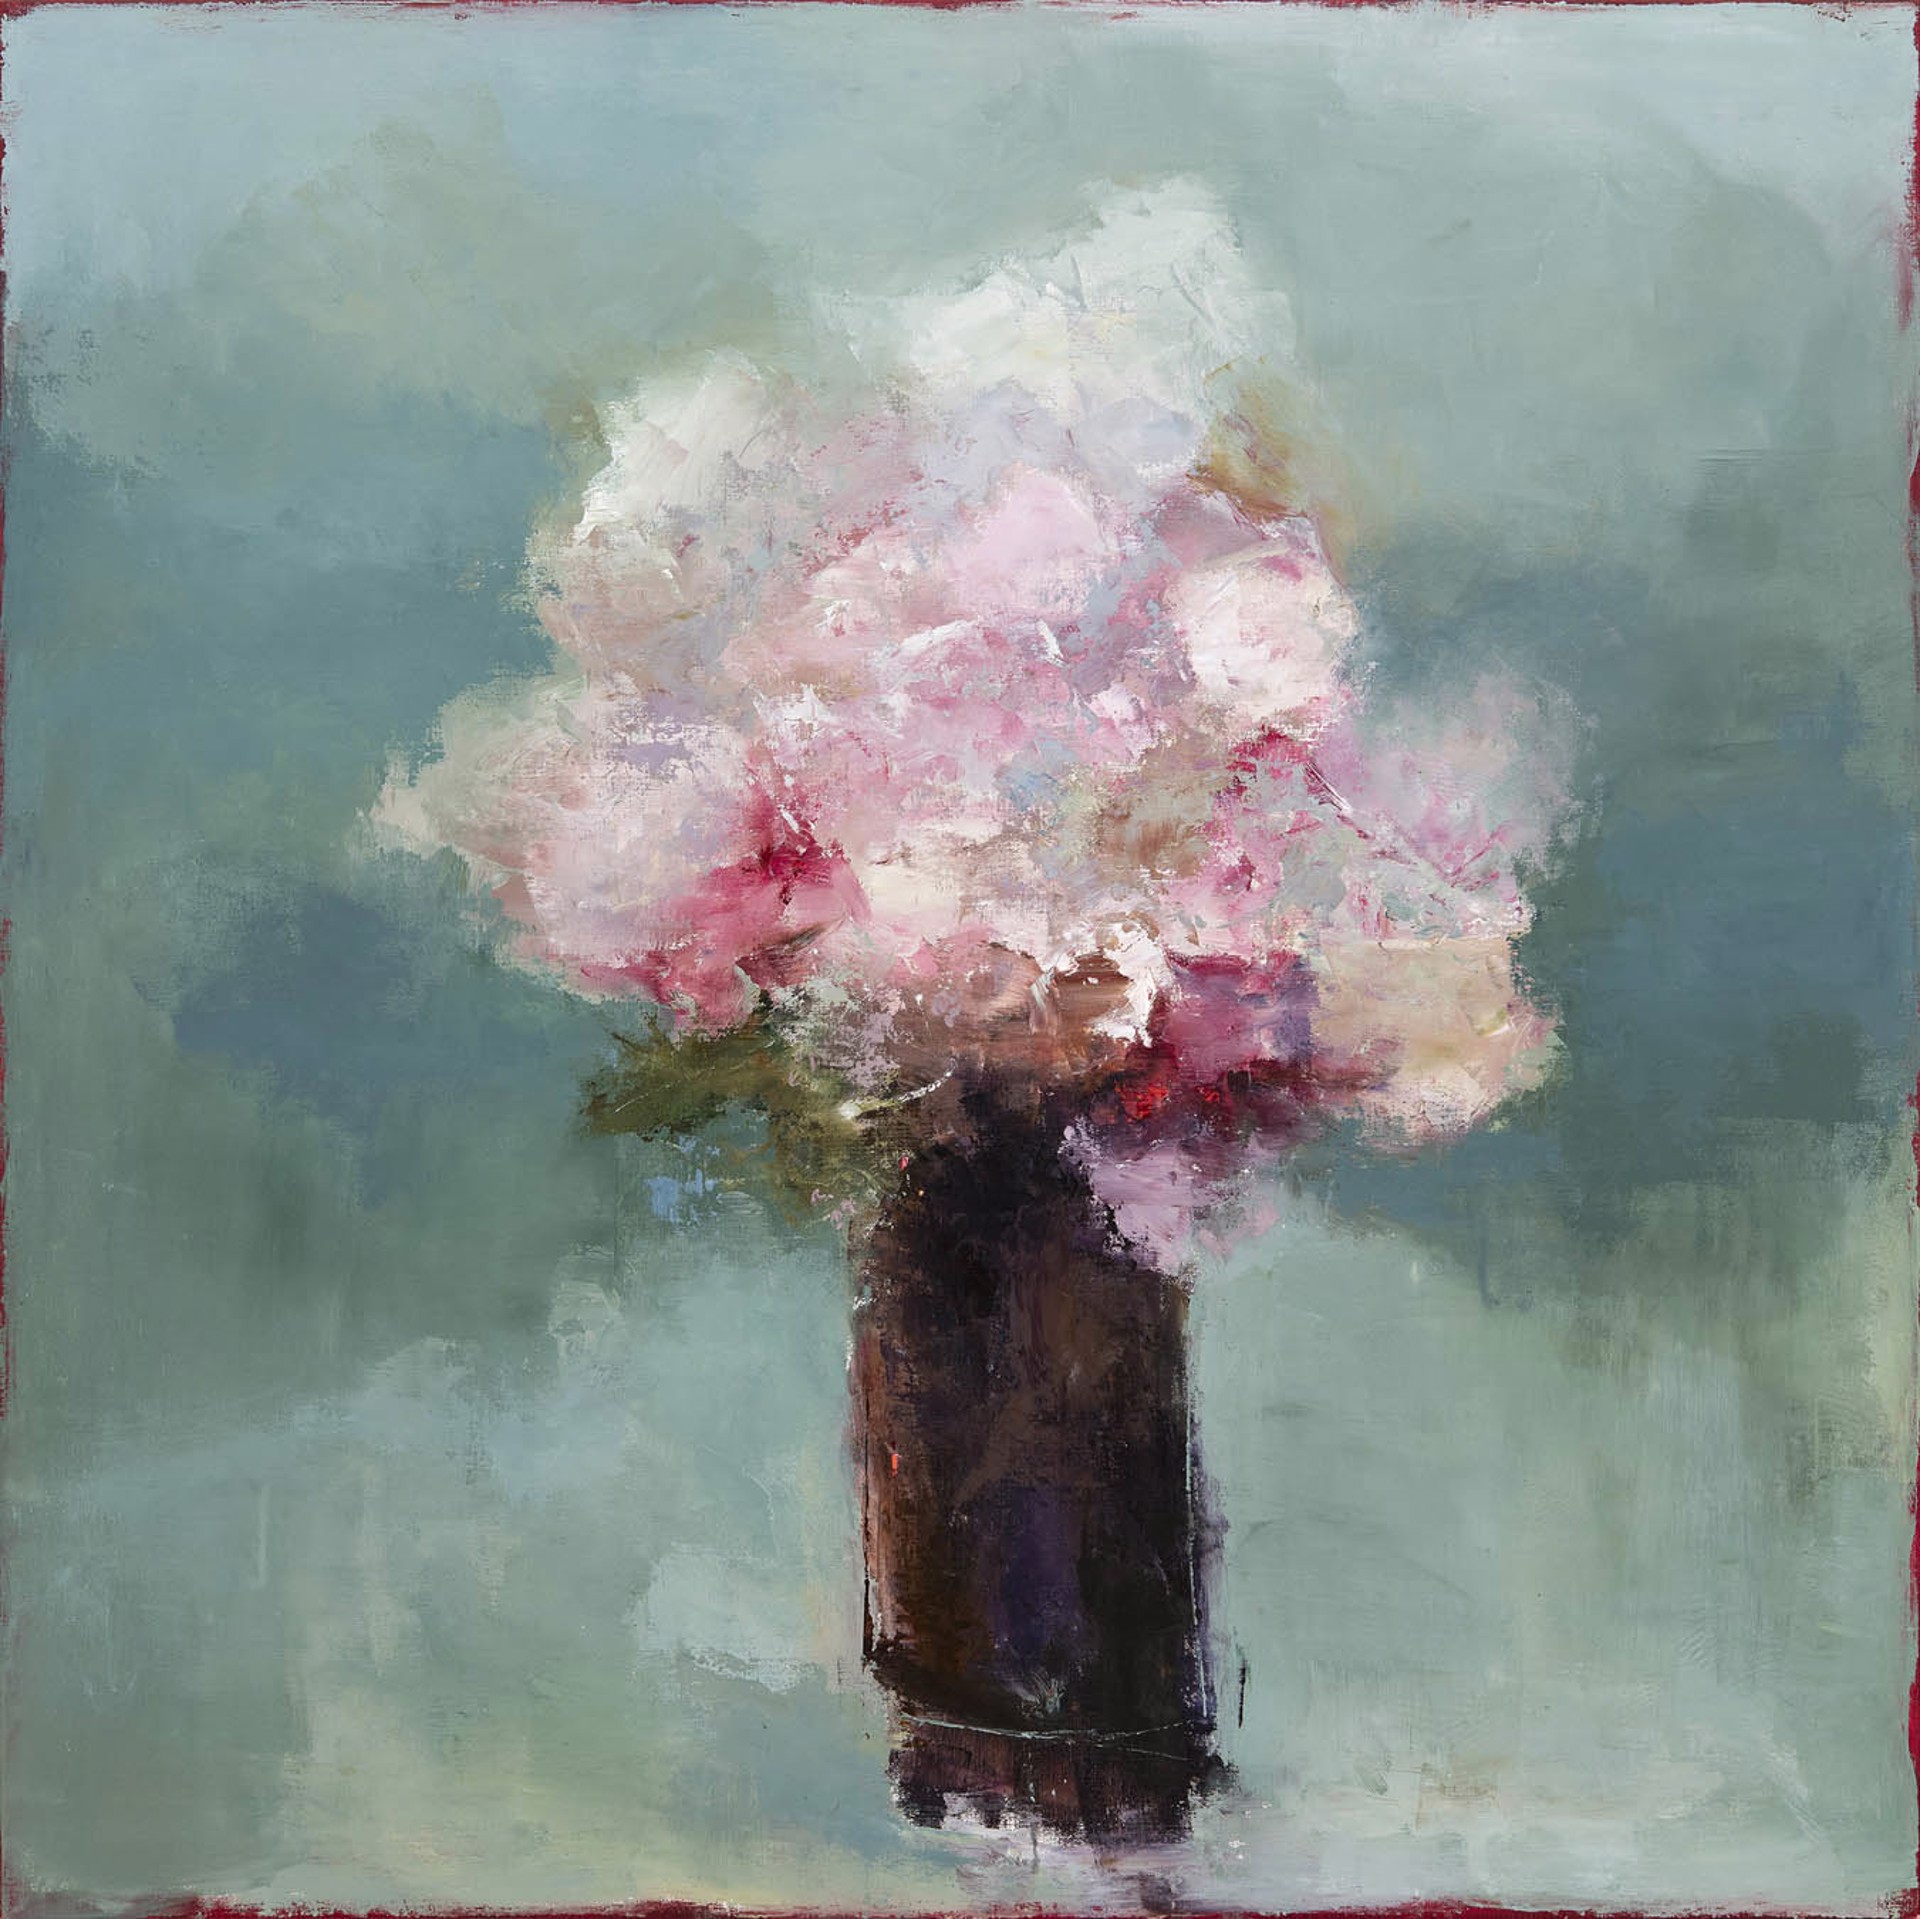 Memories Stirring with Spring Rain by France Jodoin